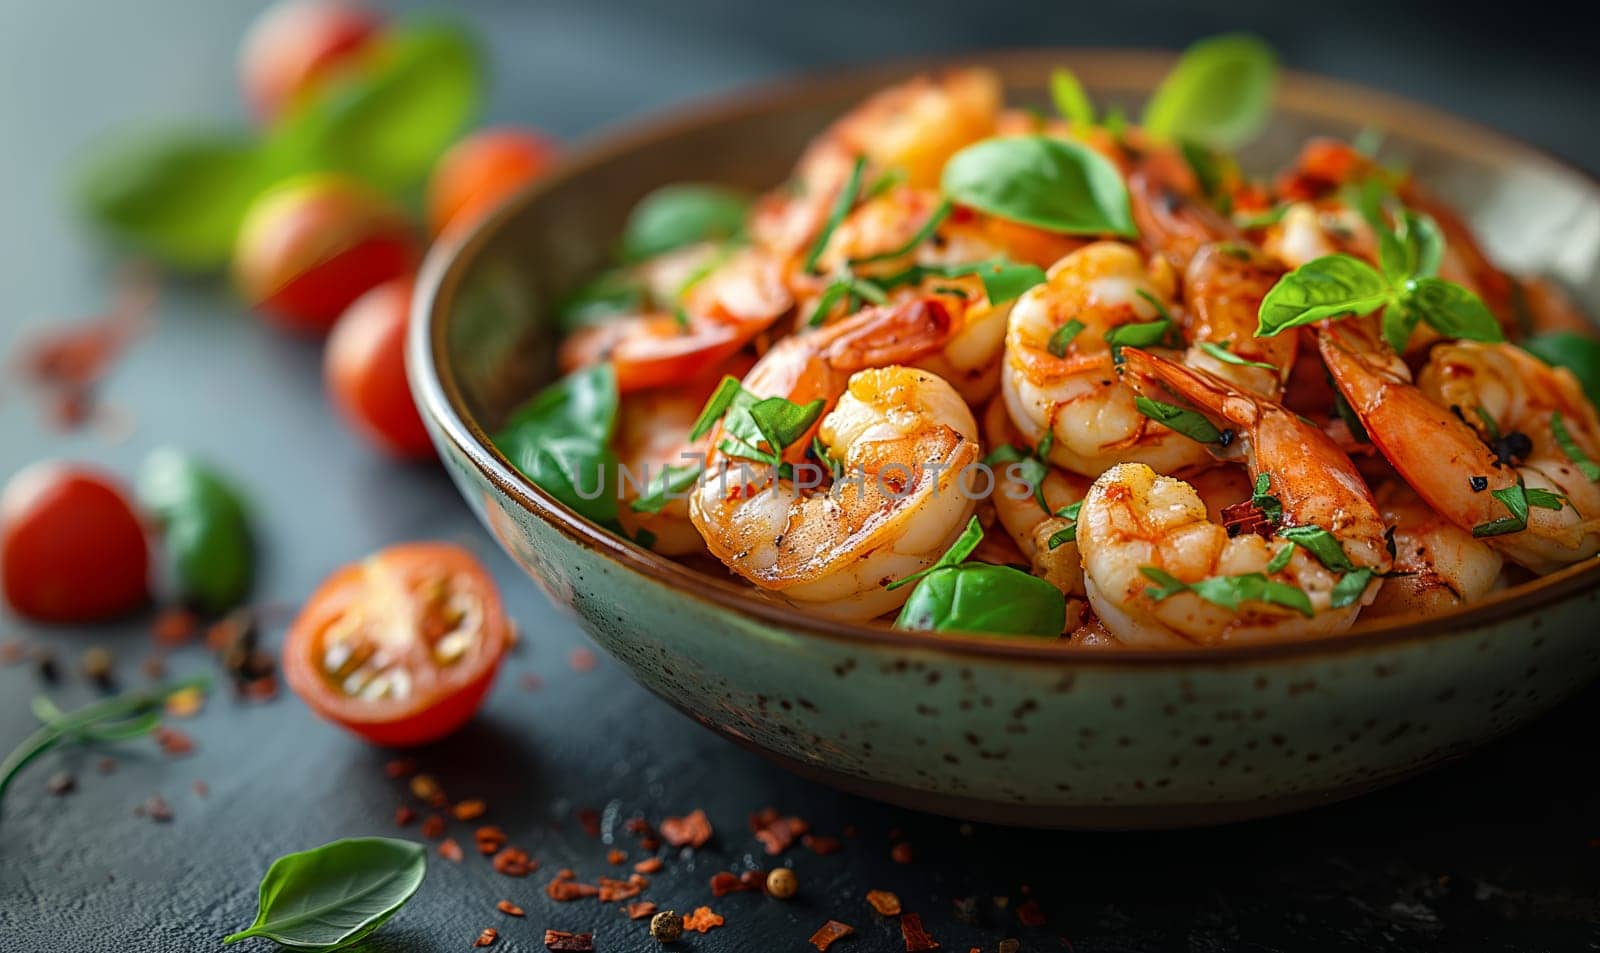 Delicious sauteed spicy shrimp with lime and basilik. by Fischeron